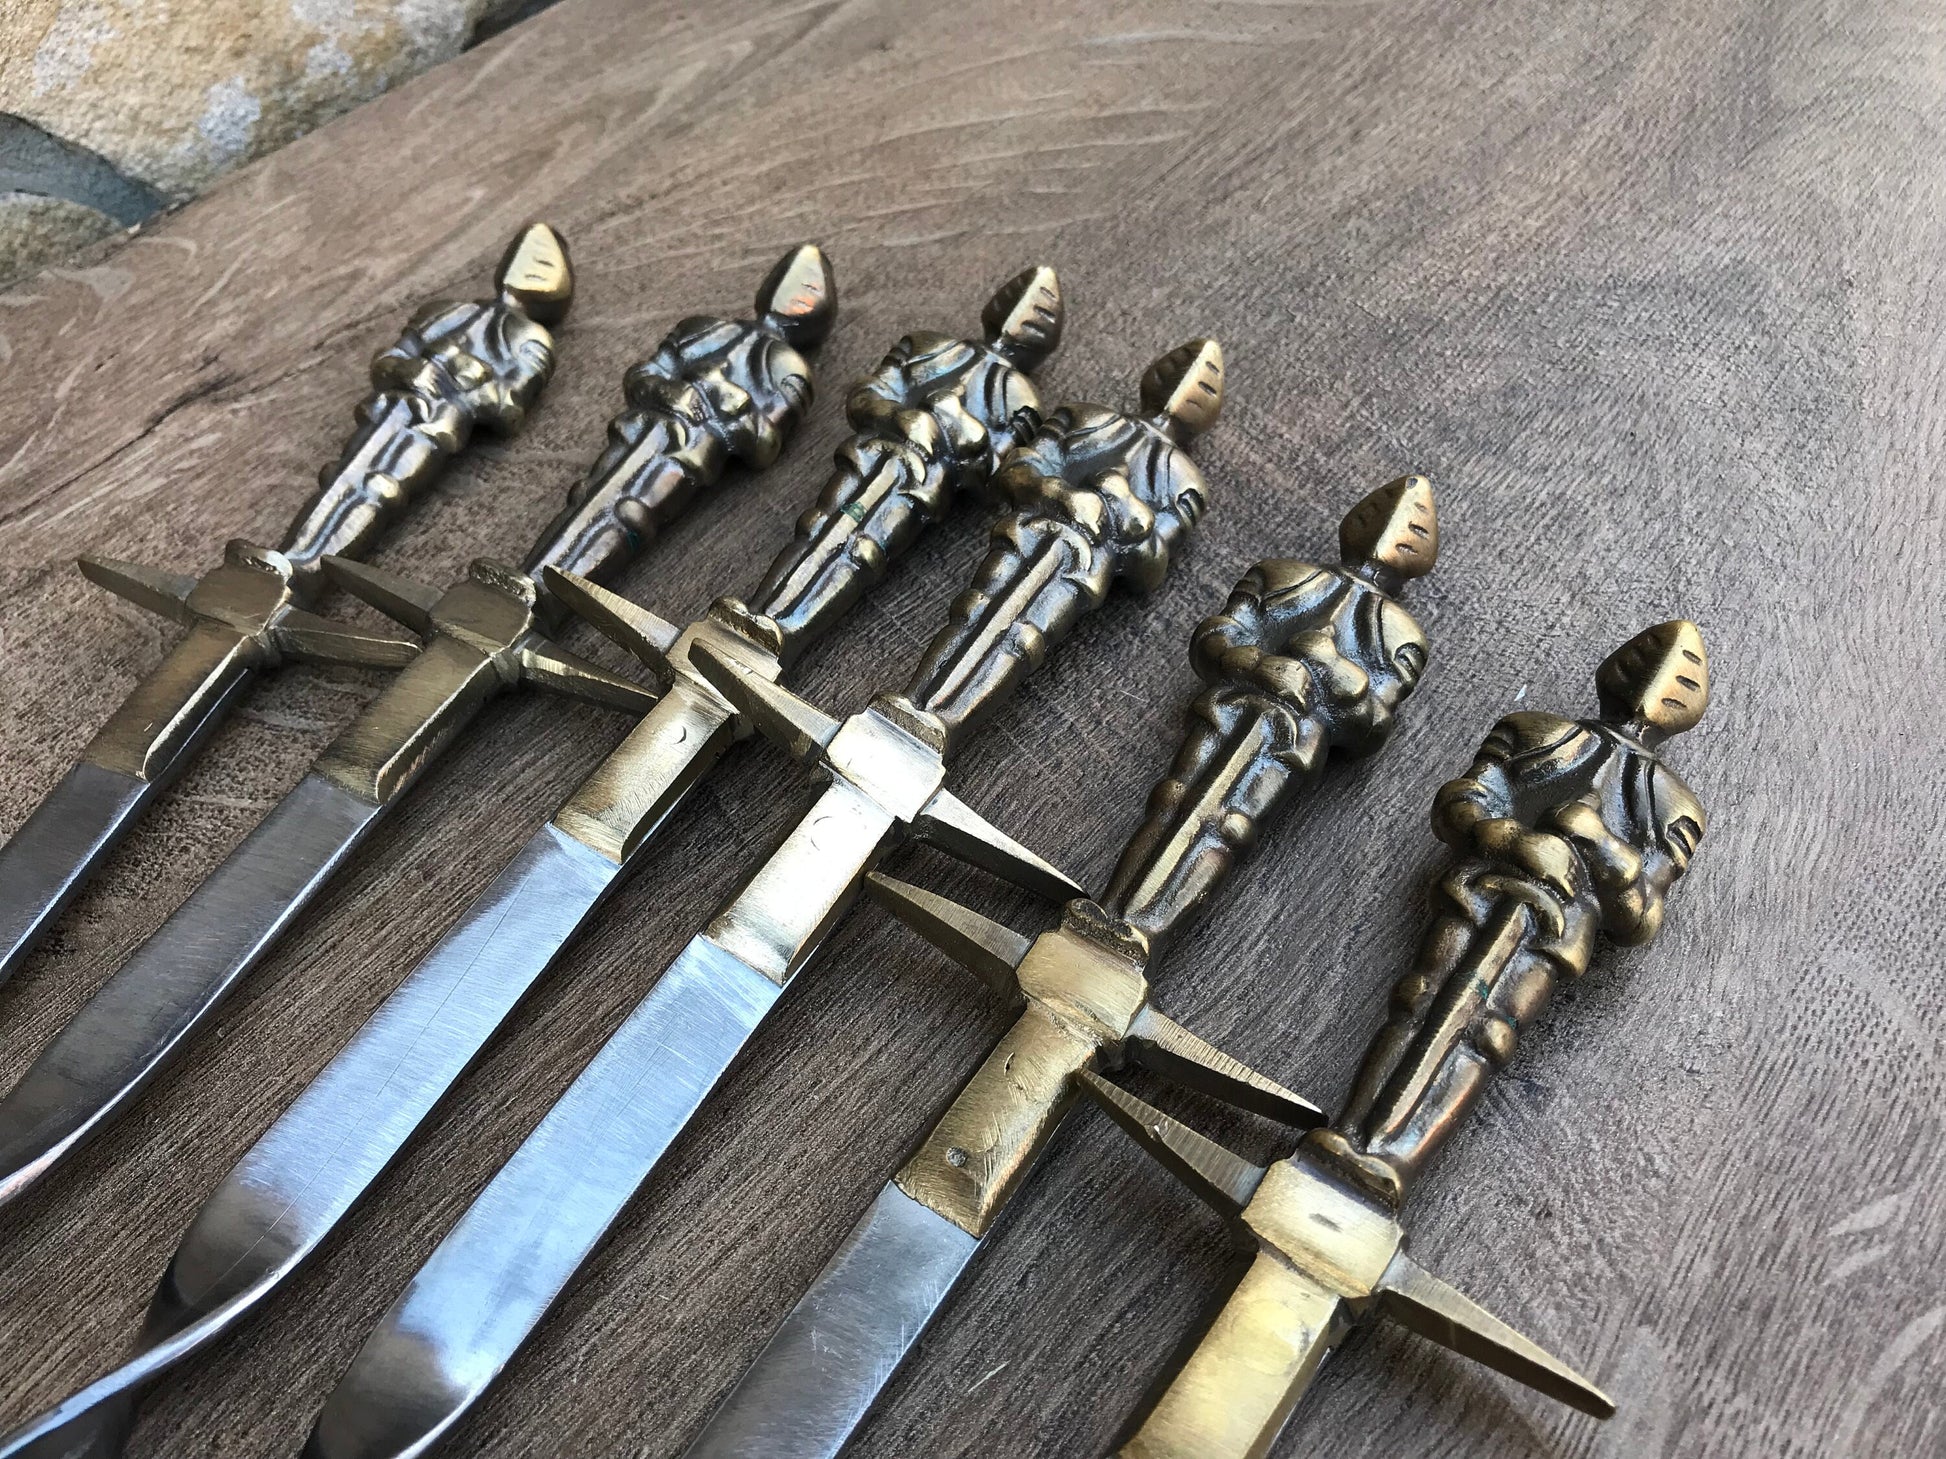 Skewers, picnic, viking, knight, grill tools, pricker, Middle Ages, camping, medieval, anniversary, retirement, fireplace,gift for mom,daddy